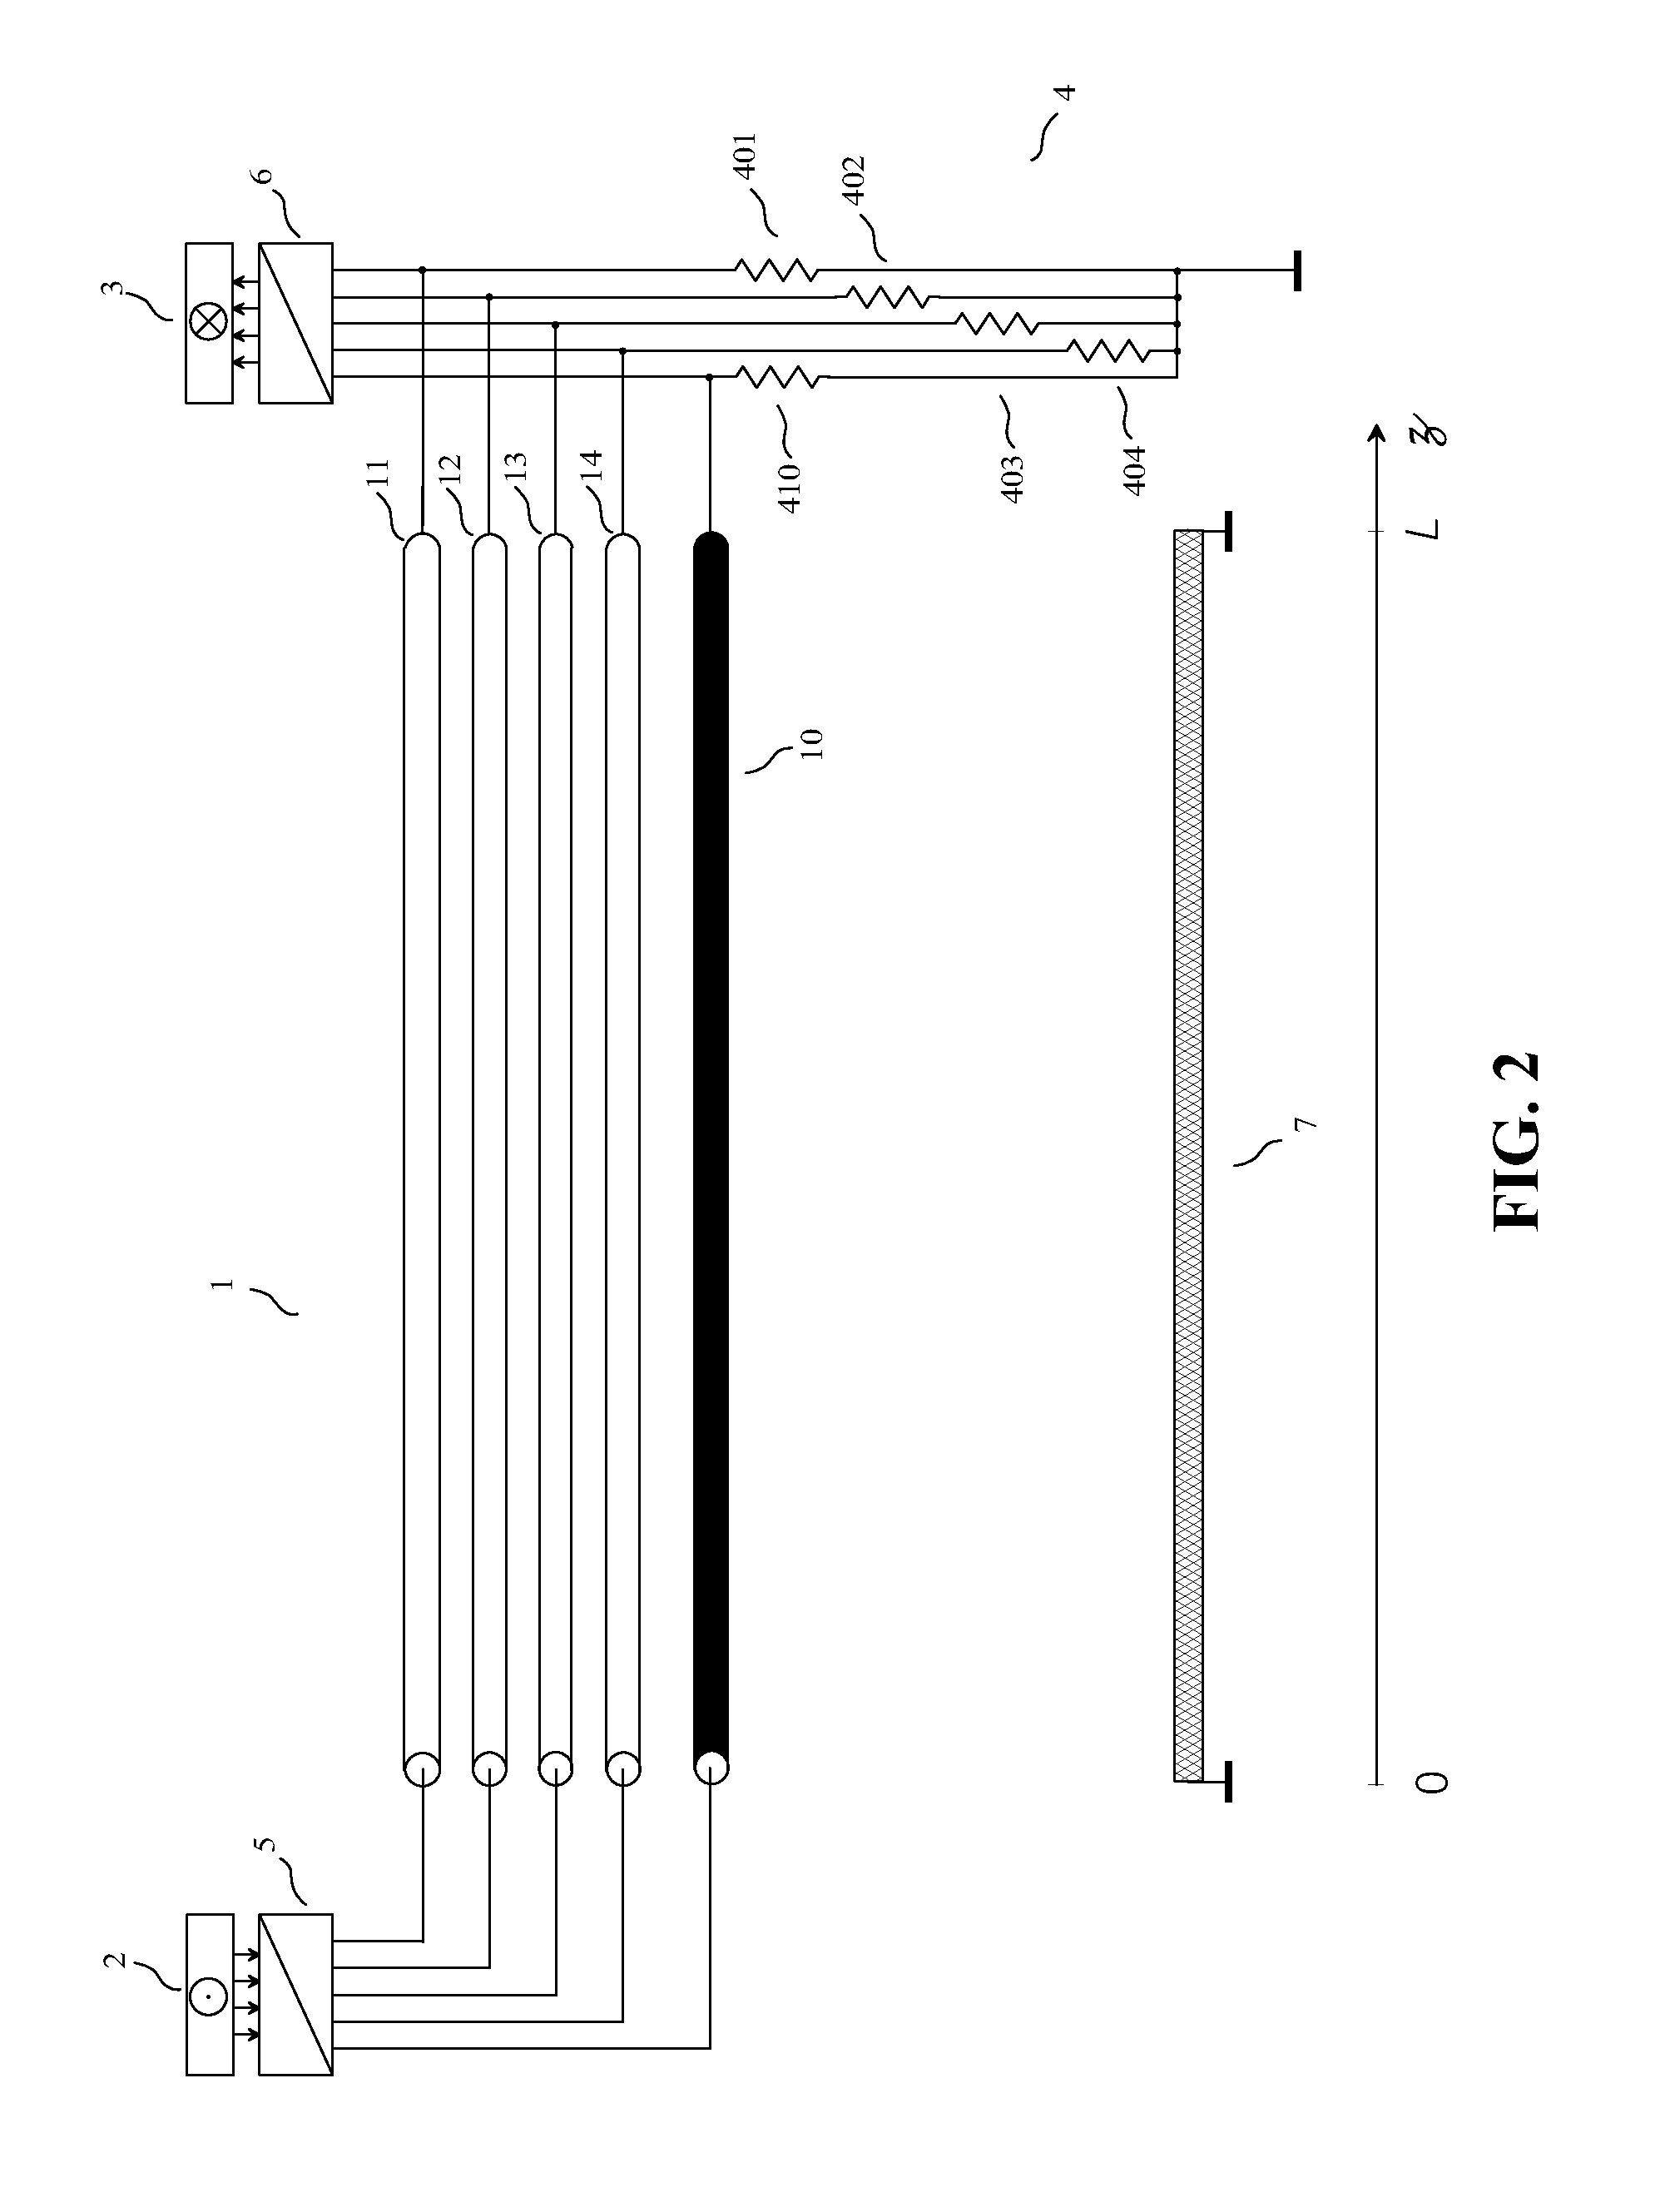 Pseudo-differential interfacing device having a switching circuit